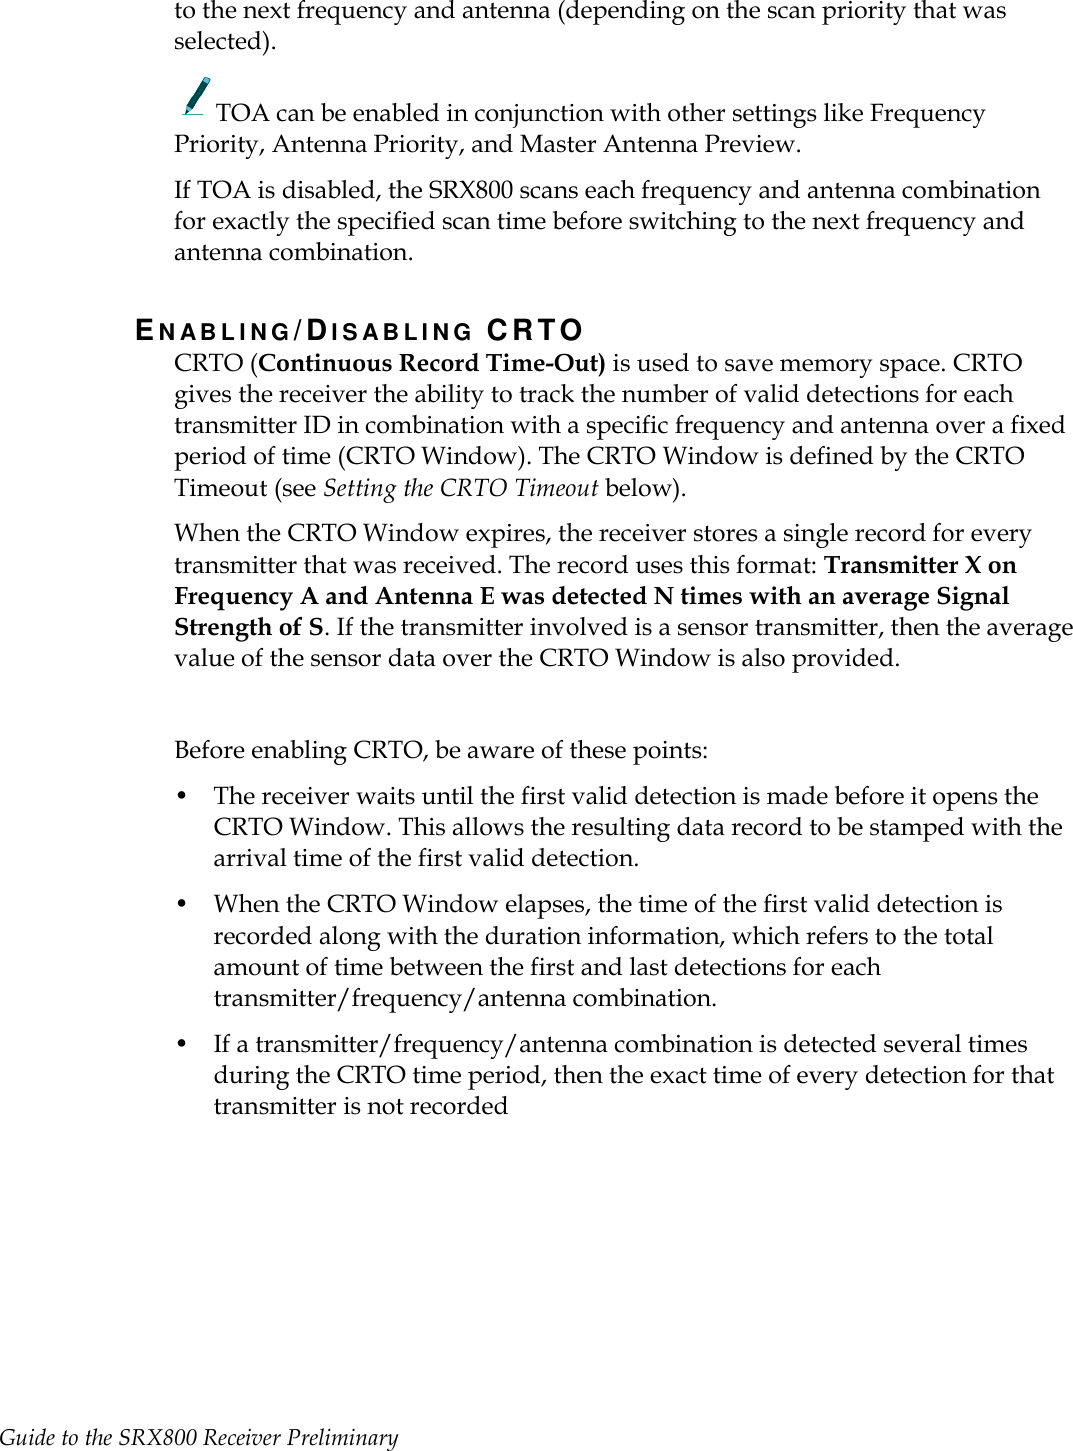 Guide to the SRX800 Receiver Preliminary     to the next frequency and antenna (depending on the scan priority that was selected).   TOA can be enabled in conjunction with other settings like Frequency Priority, Antenna Priority, and Master Antenna Preview. If TOA is disabled, the SRX800 scans each frequency and antenna combination for exactly the specified scan time before switching to the next frequency and antenna combination. EN A B L I N G /DI S A B L I N G   CRTO CRTO (Continuous Record Time-Out) is used to save memory space. CRTO gives the receiver the ability to track the number of valid detections for each transmitter ID in combination with a specific frequency and antenna over a fixed period of time (CRTO Window). The CRTO Window is defined by the CRTO Timeout (see Setting the CRTO Timeout below). When the CRTO Window expires, the receiver stores a single record for every transmitter that was received. The record uses this format: Transmitter X on Frequency A and Antenna E was detected N times with an average Signal Strength of S. If the transmitter involved is a sensor transmitter, then the average value of the sensor data over the CRTO Window is also provided.  Before enabling CRTO, be aware of these points: • The receiver waits until the first valid detection is made before it opens the CRTO Window. This allows the resulting data record to be stamped with the arrival time of the first valid detection. • When the CRTO Window elapses, the time of the first valid detection is recorded along with the duration information, which refers to the total amount of time between the first and last detections for each transmitter/frequency/antenna combination. • If a transmitter/frequency/antenna combination is detected several times during the CRTO time period, then the exact time of every detection for that transmitter is not recorded   